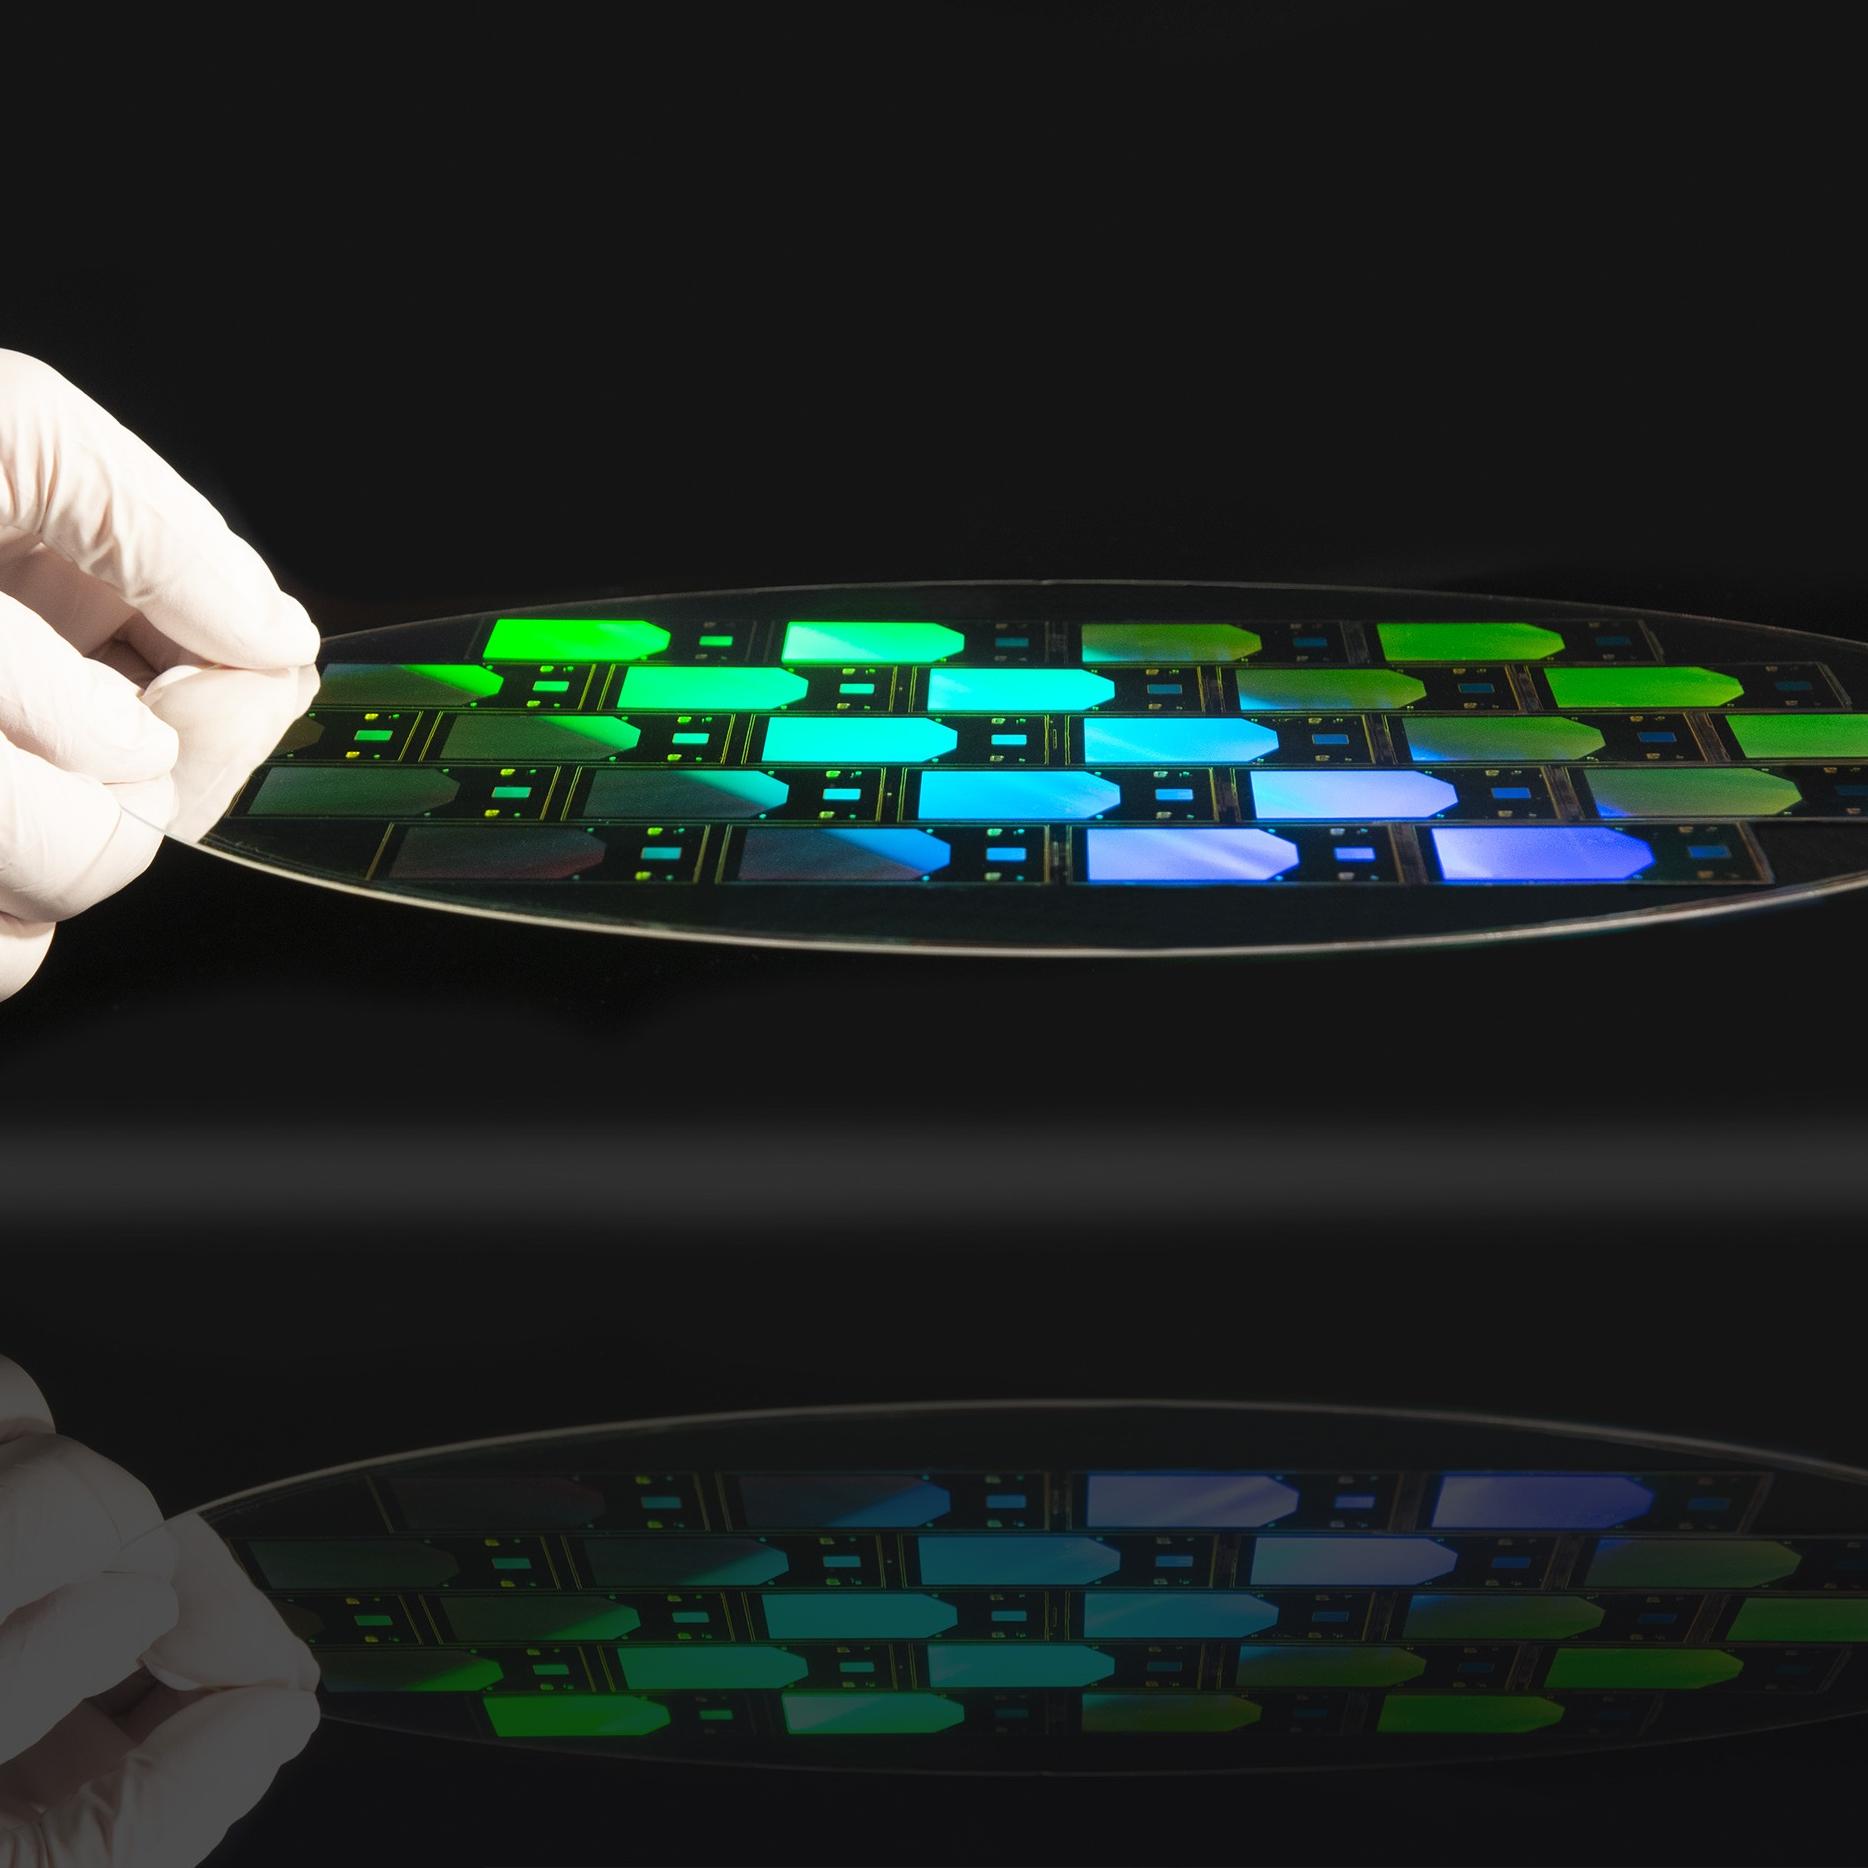 SCHOTT RealView glass wafer for augmented and mixed reality